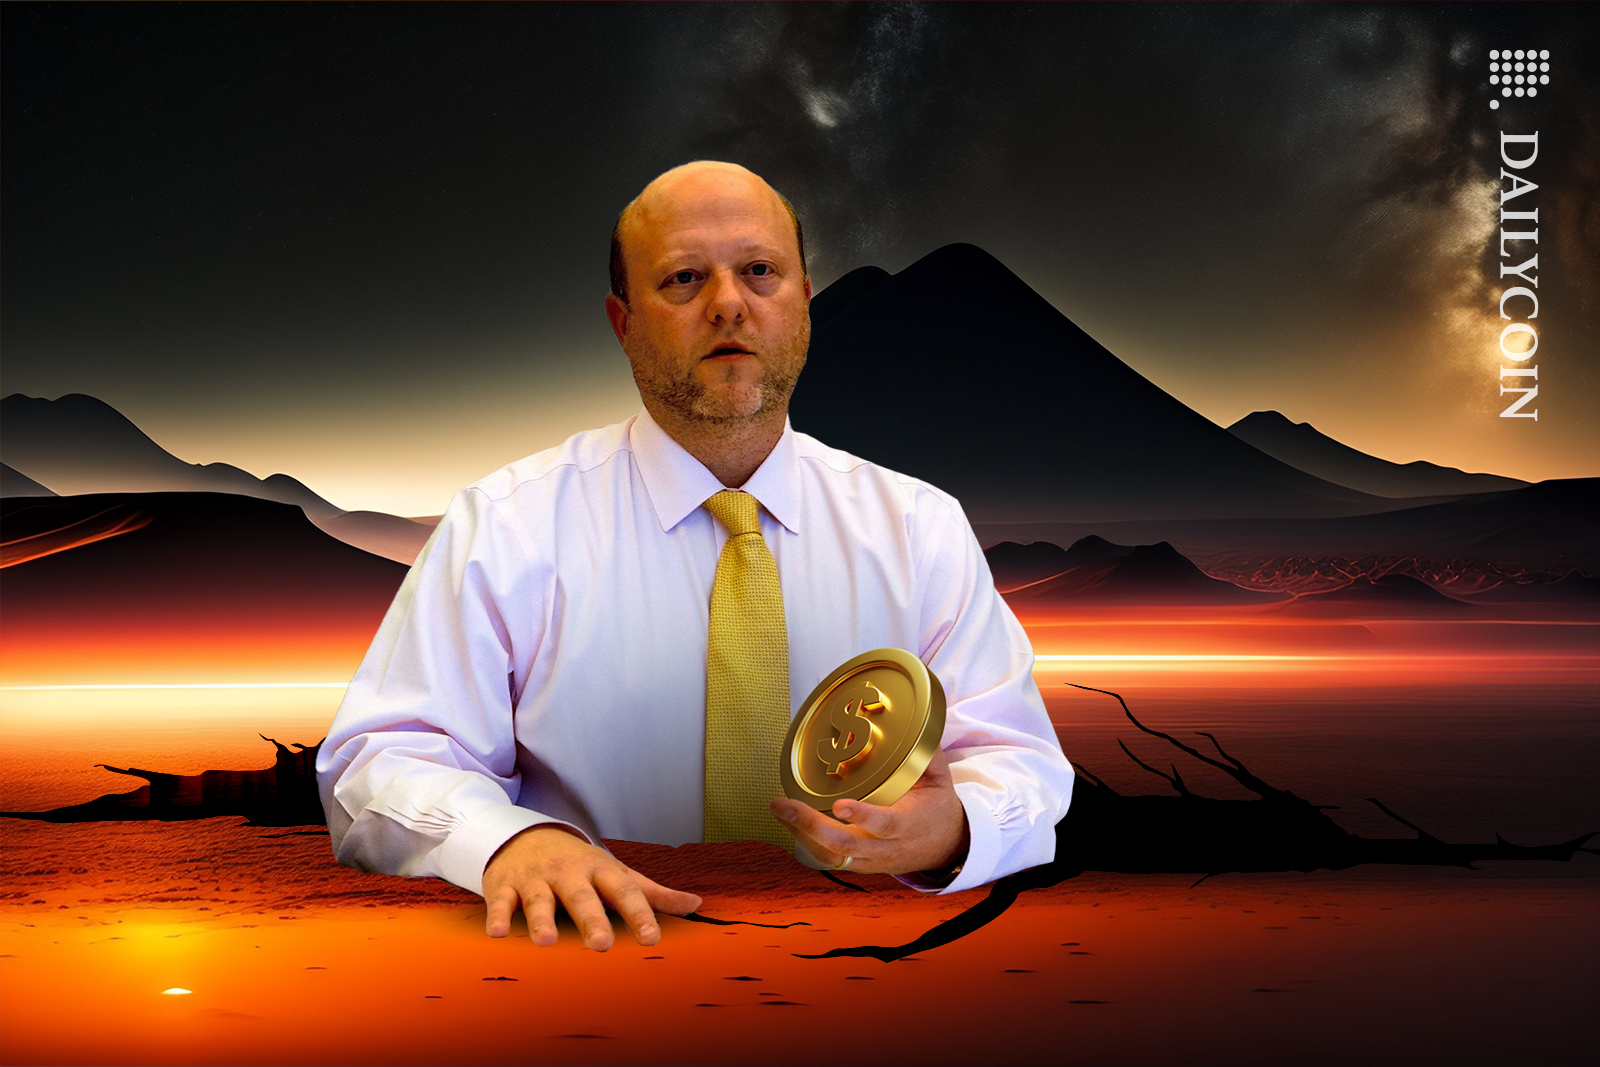 Jeremy Allaire holding a dollar coin from a crack in the ground looking upset in dark red landscape.